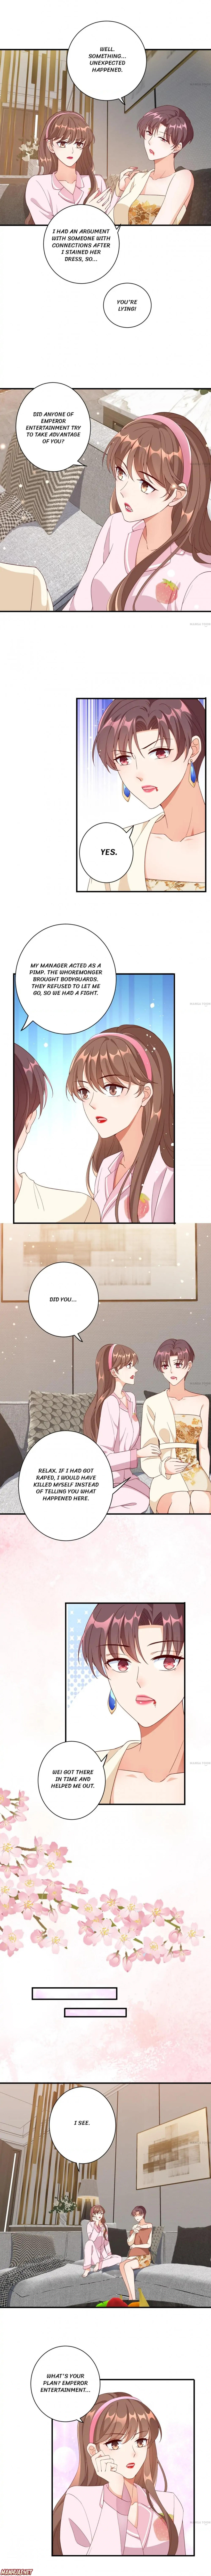 Breakup Loading 99% Chapter 41 - Page 1